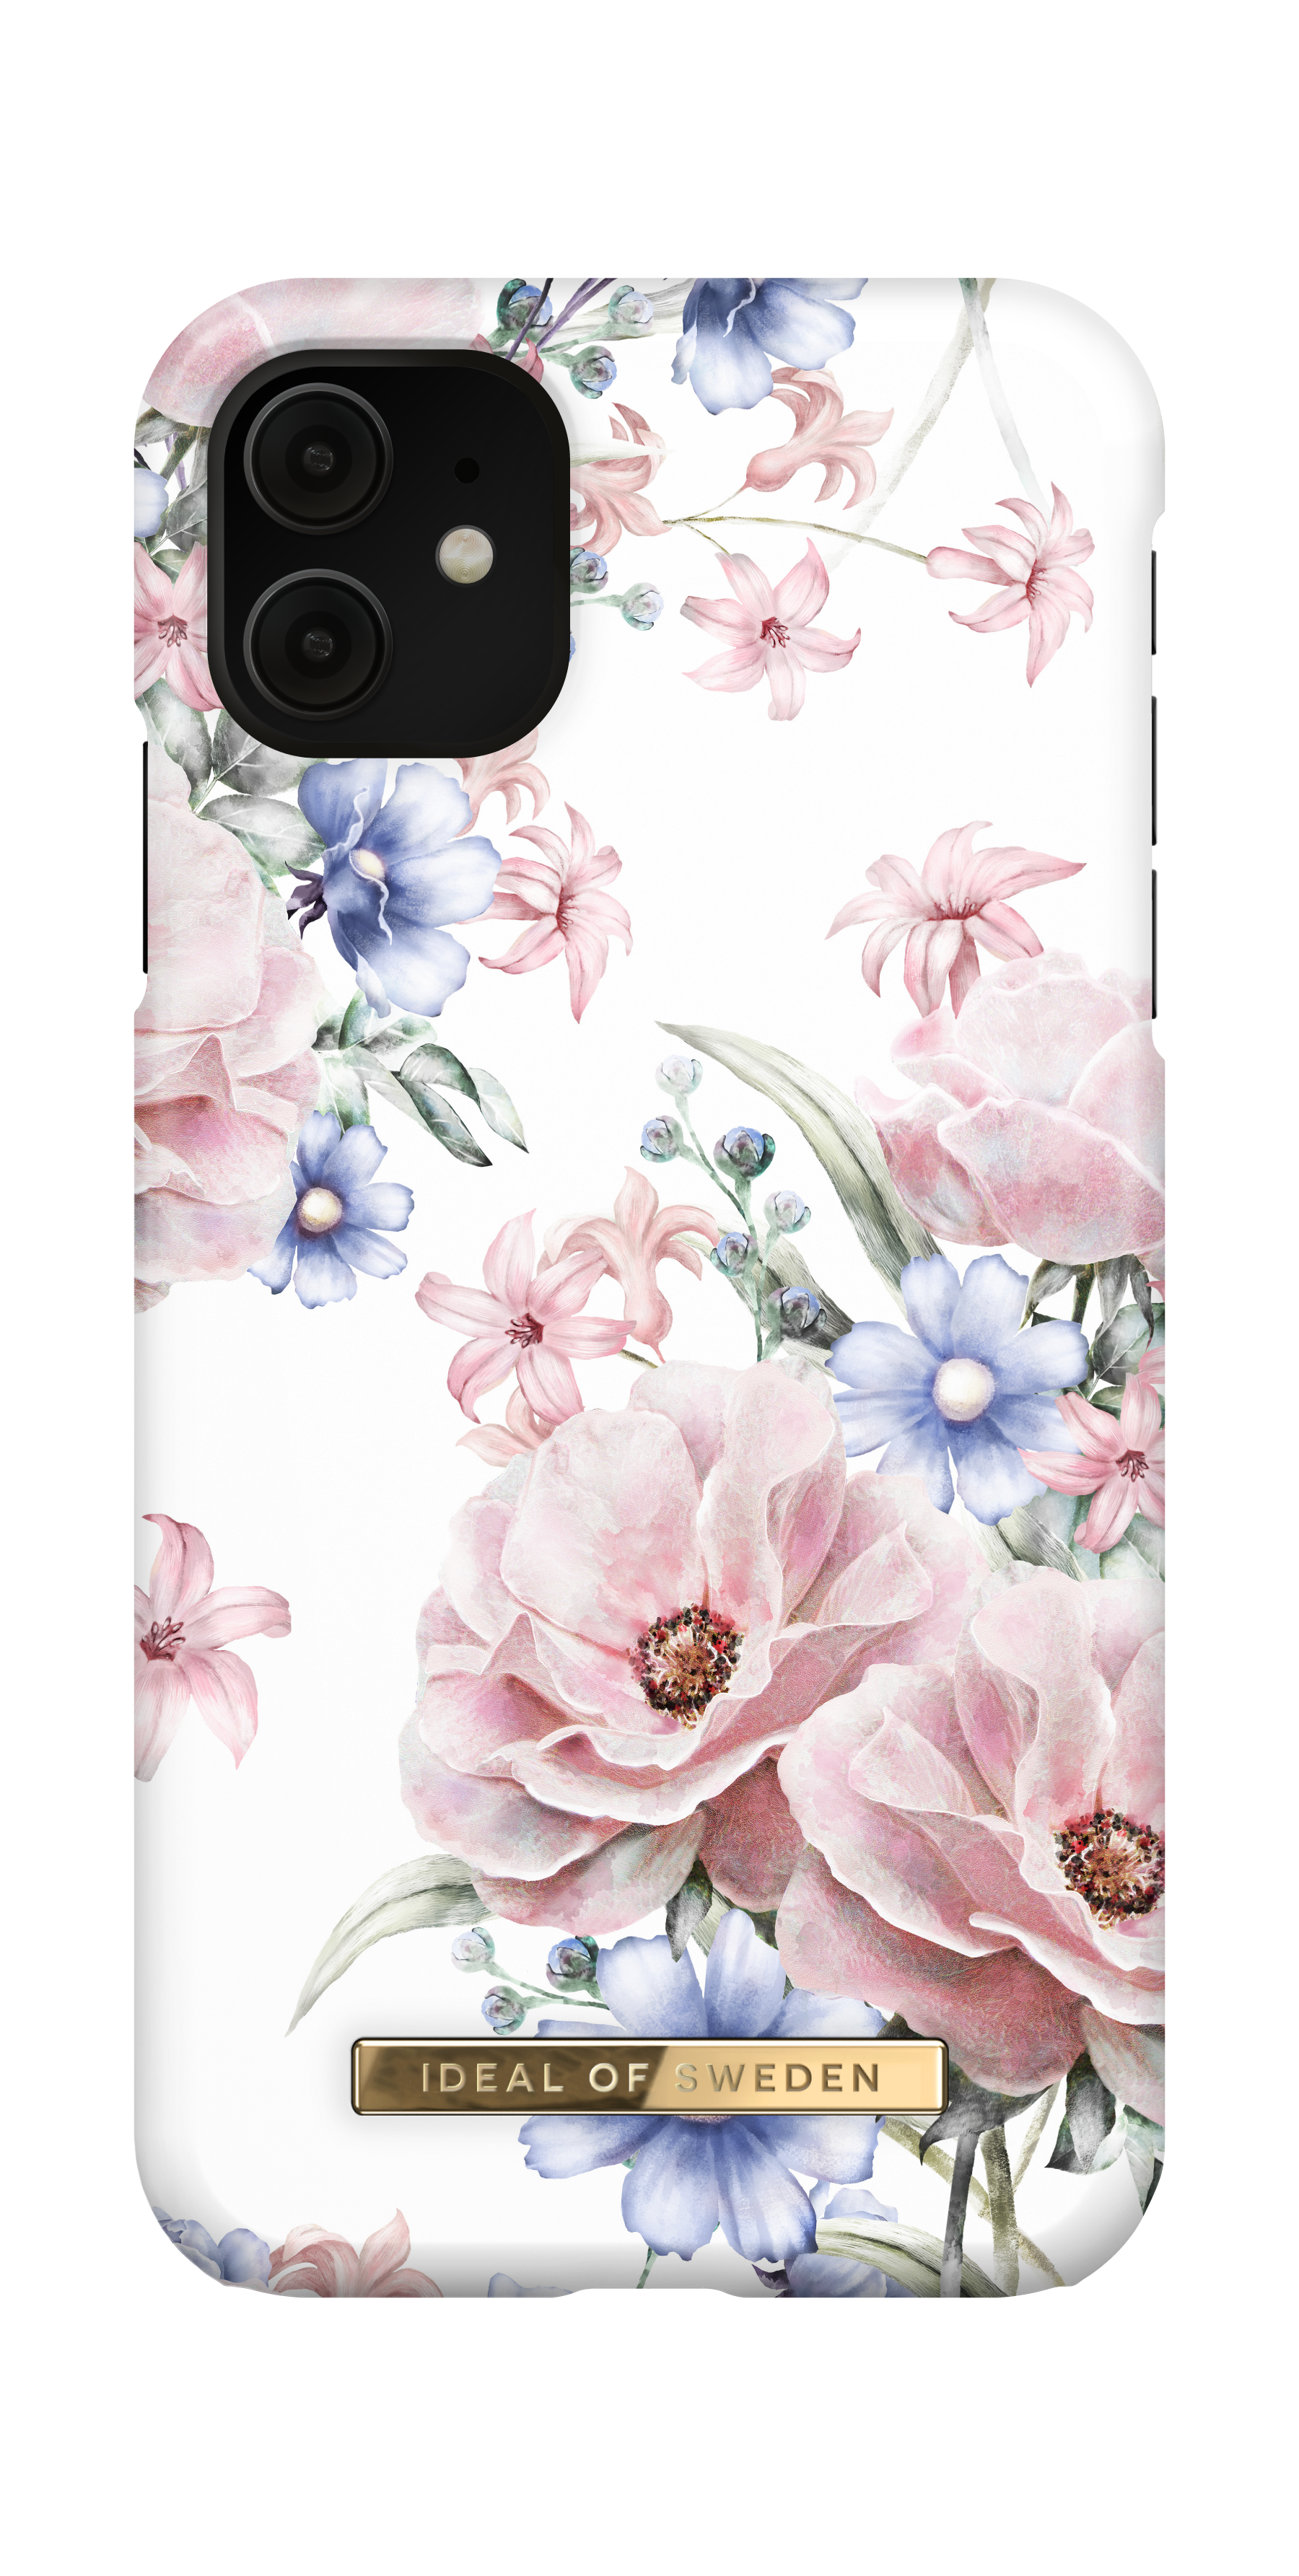 IDEAL OF SWEDEN XR, IDFCS17-I1961-58, Apple, iPhone 11, iPhone Floral Backcover, Romance